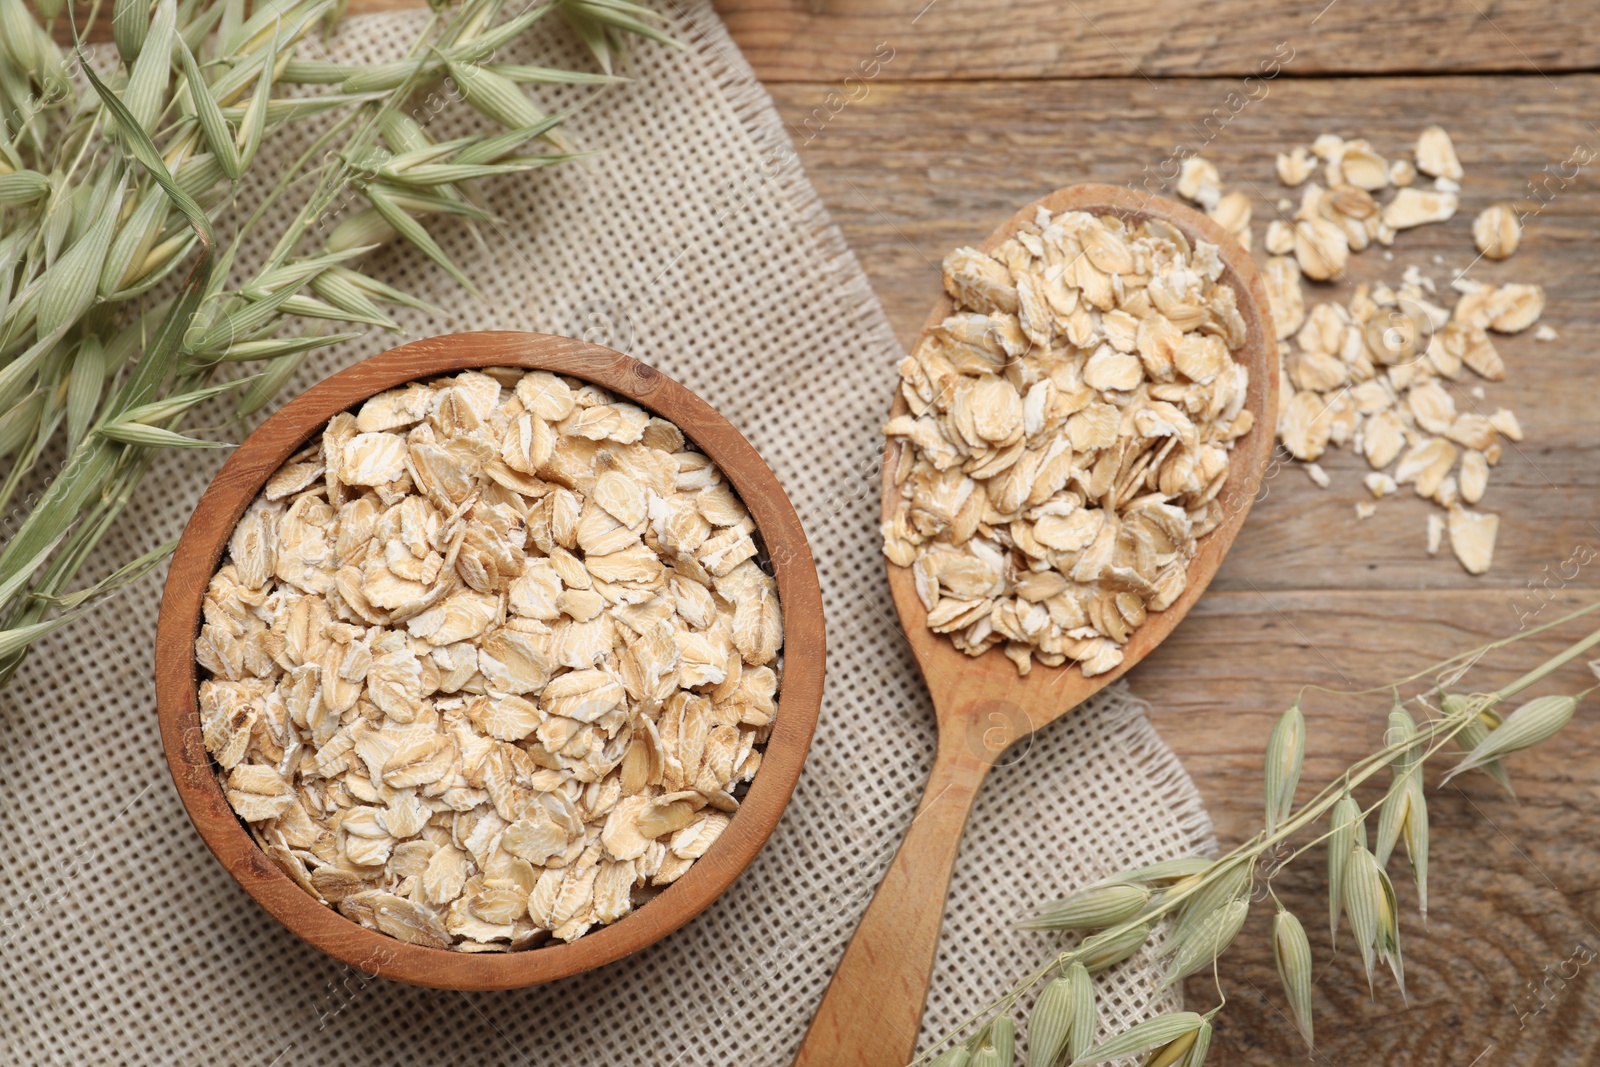 Photo of Oatmeal and branches with florets on wooden table, flat lay